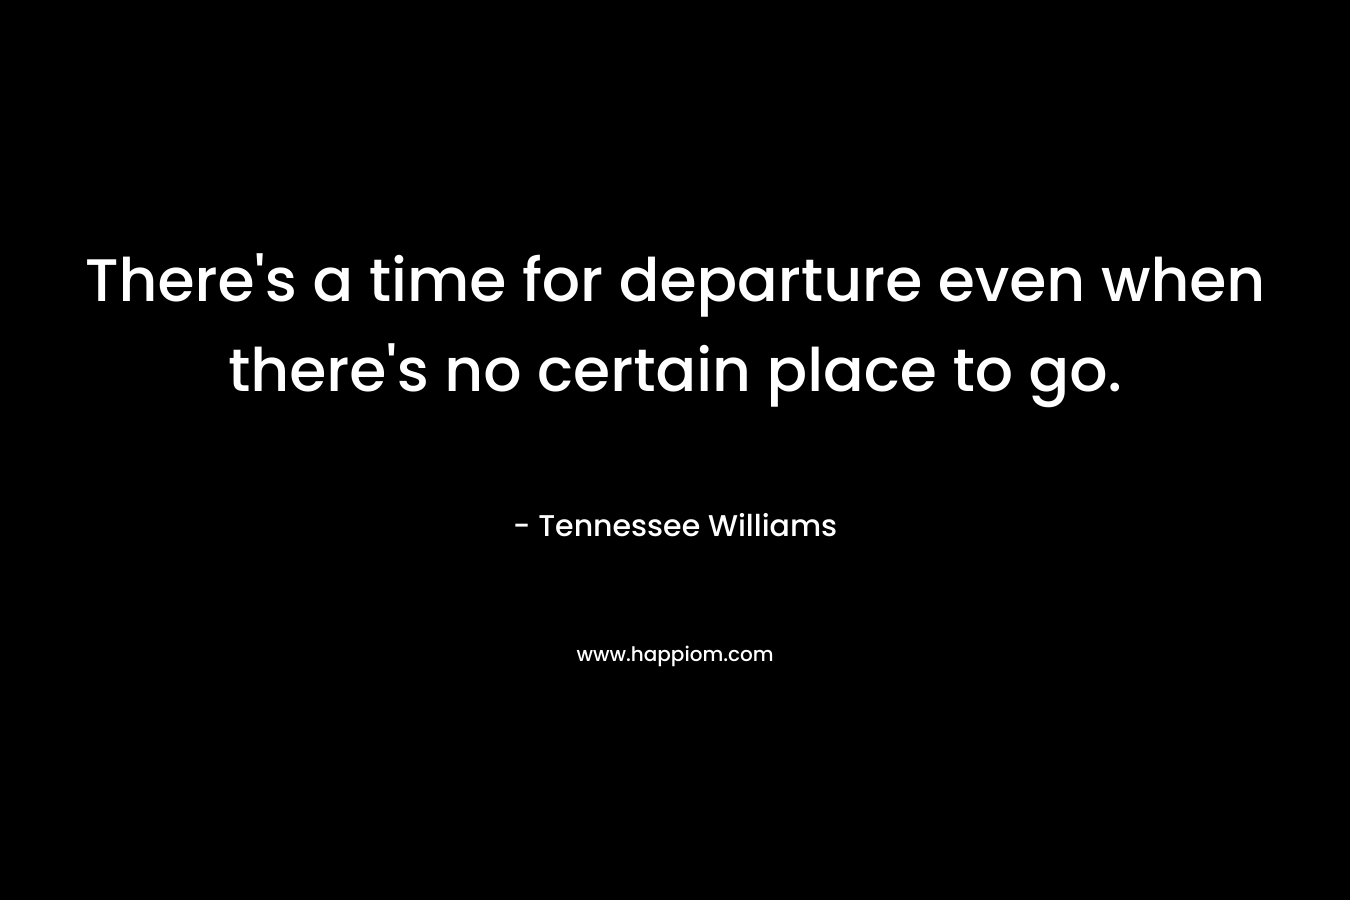 There's a time for departure even when there's no certain place to go.